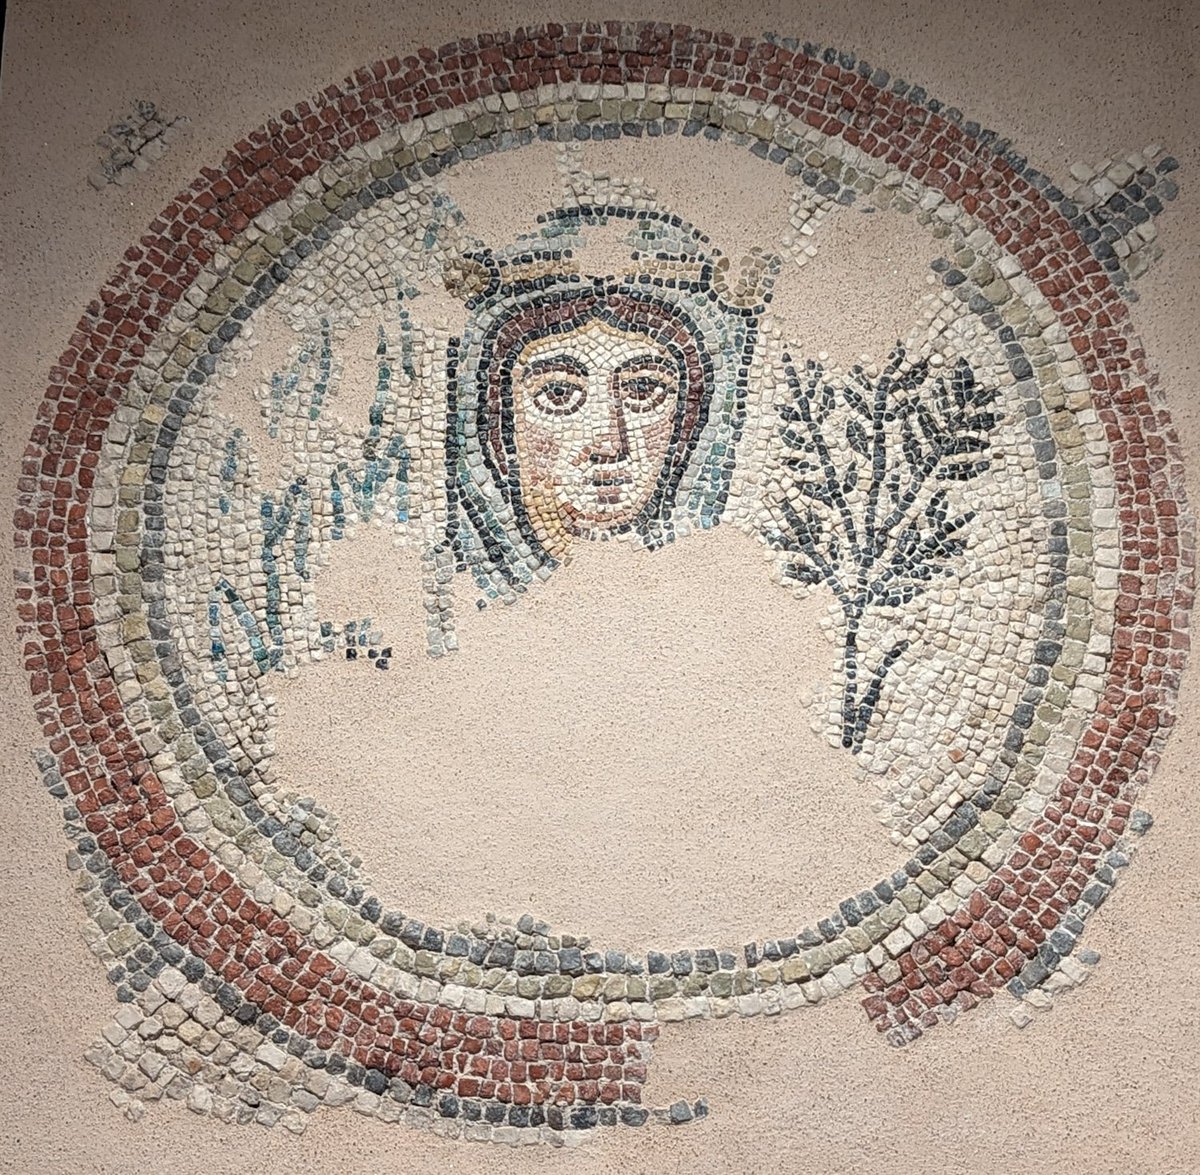 For #MosaicMonday, here's a late antique figure from Taranto, thought to represent Winter. Museo Archeologico (MARTA), Taranto (great collection, very well-displayed) #Archaeology #ClassicsTwitter